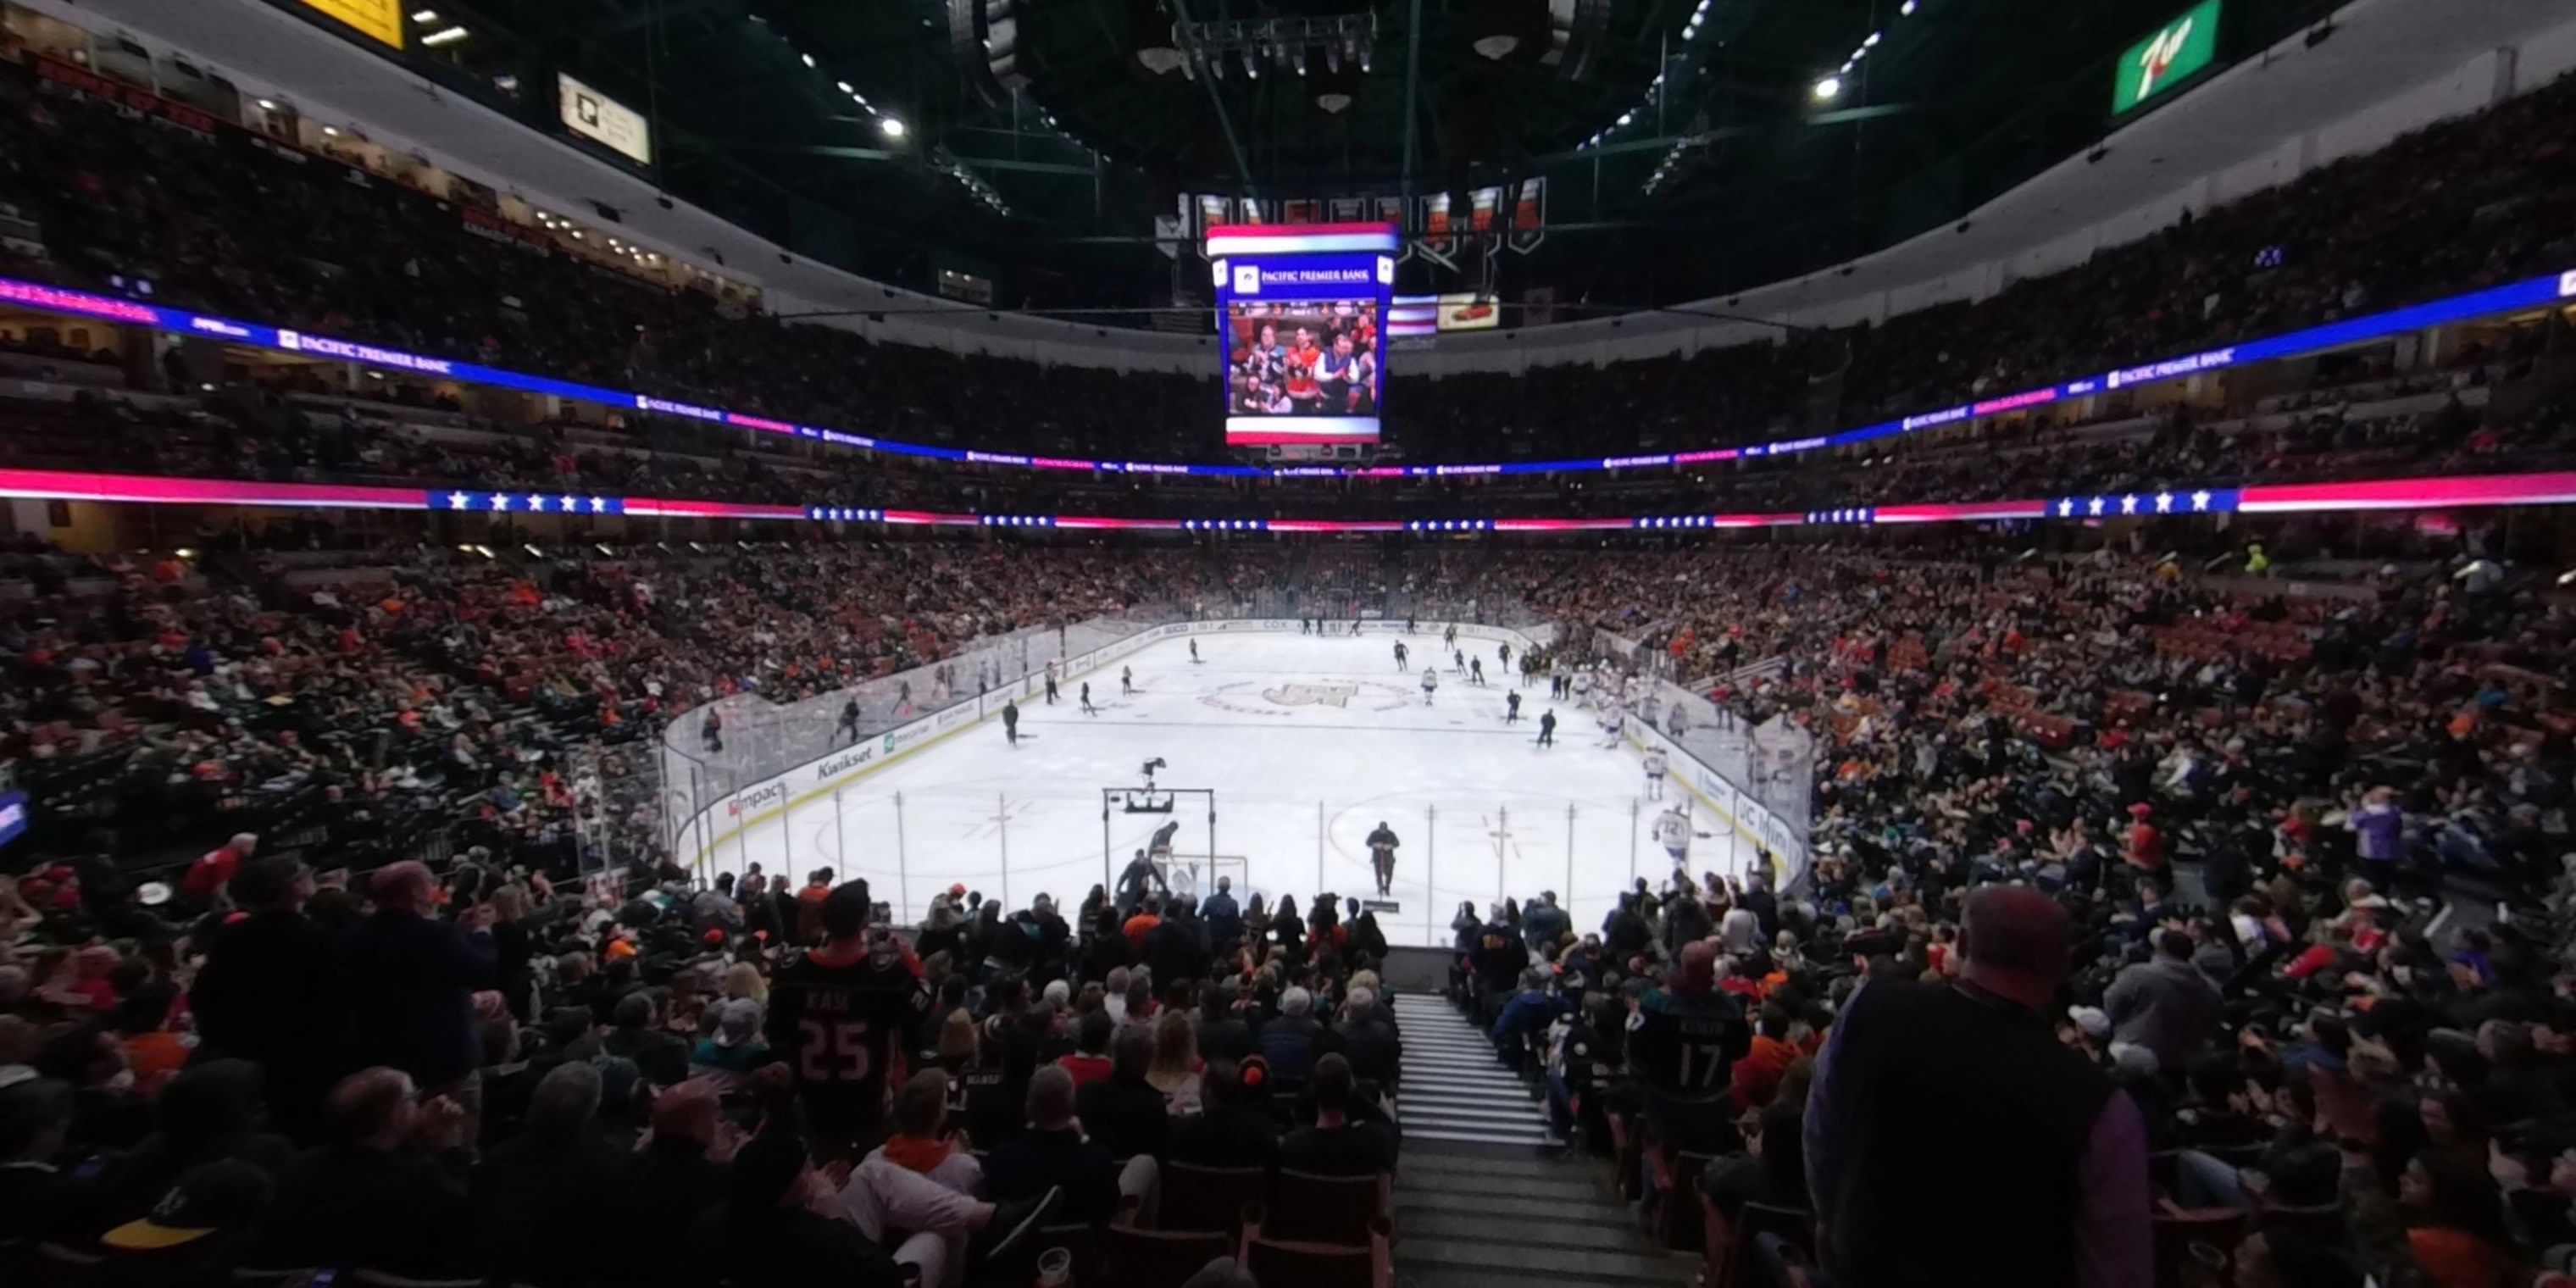 section 214 panoramic seat view  for hockey - honda center